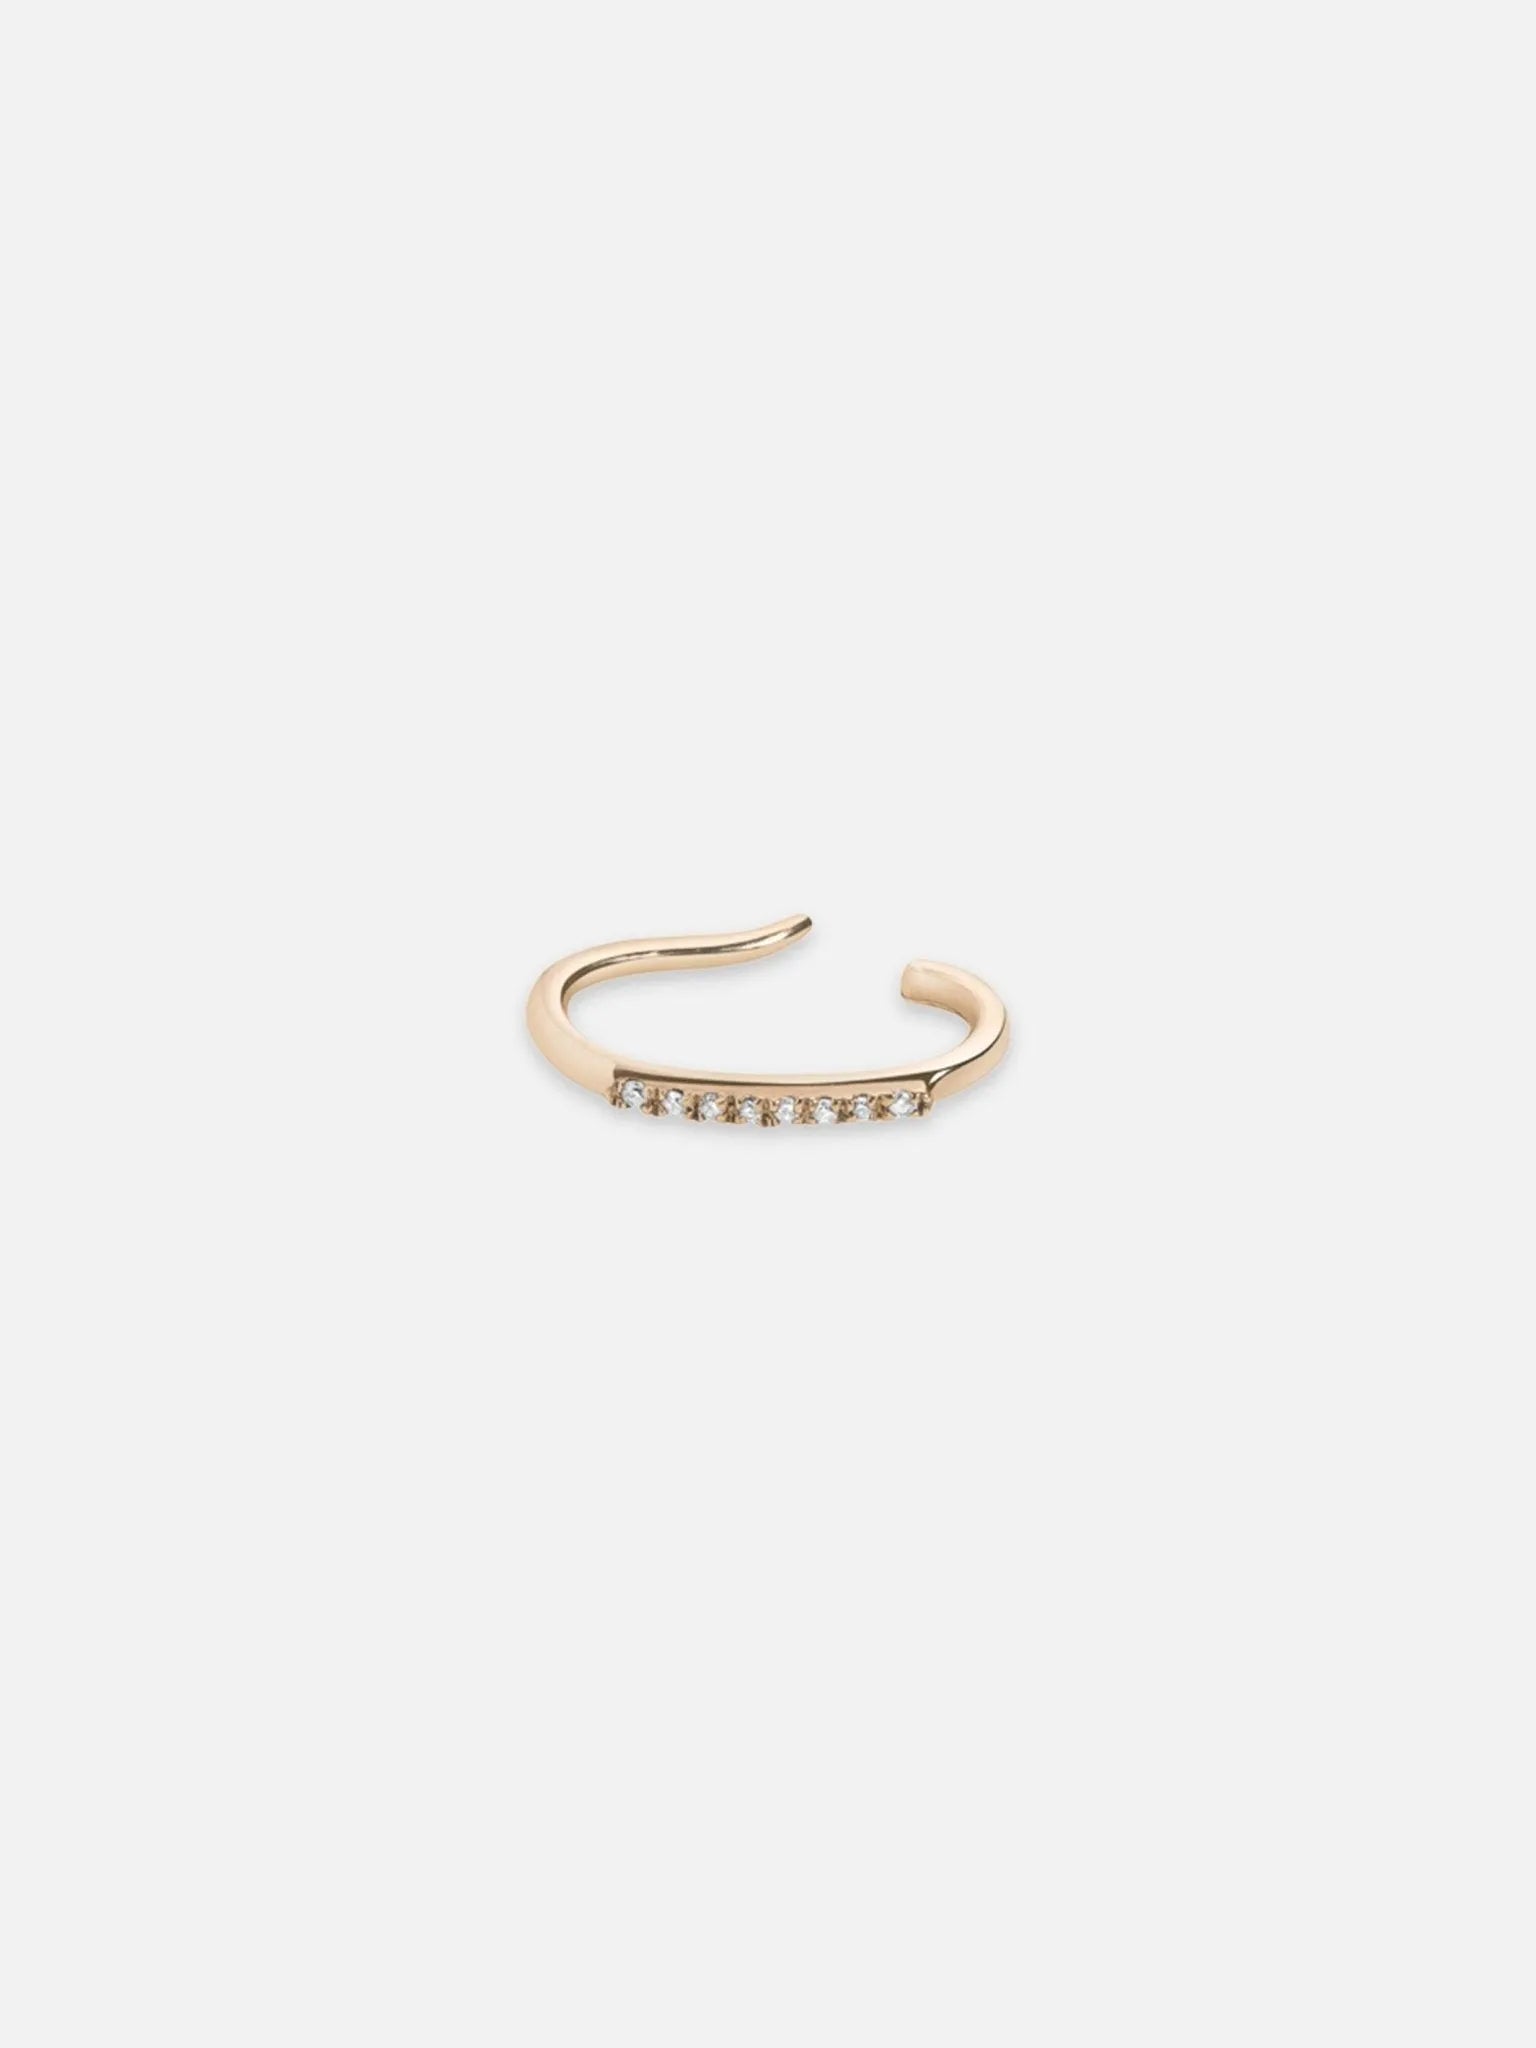 Pave Diamond Billy Cuff Gold Earring - At Present